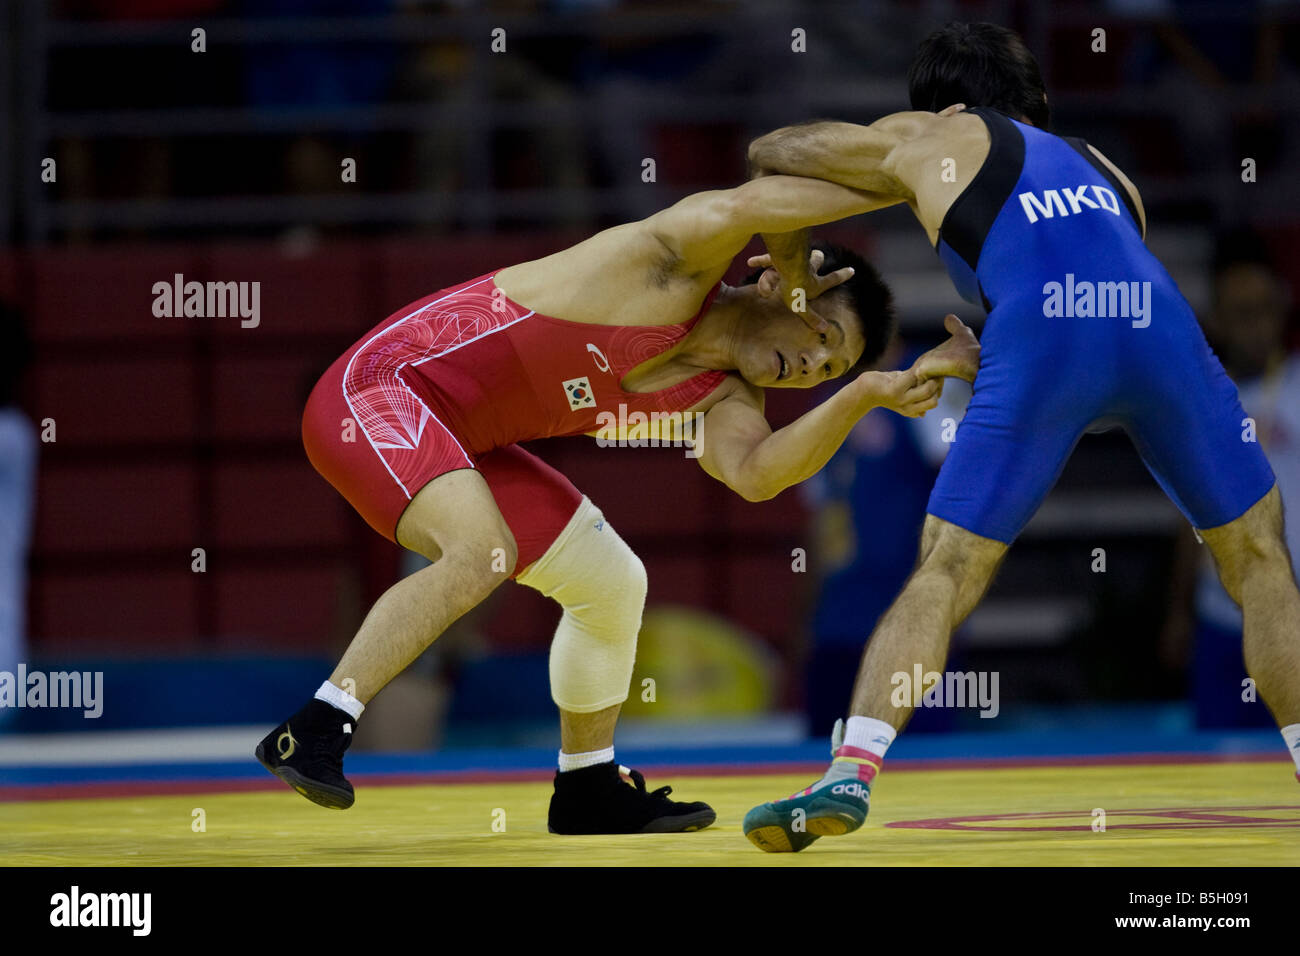 Dae Jong Kim KOR L competing against Muzad Ramazanov MKD in the 60kg freestyle wrestling 1 8 final event at the 2008 Olympic Sum Stock Photo